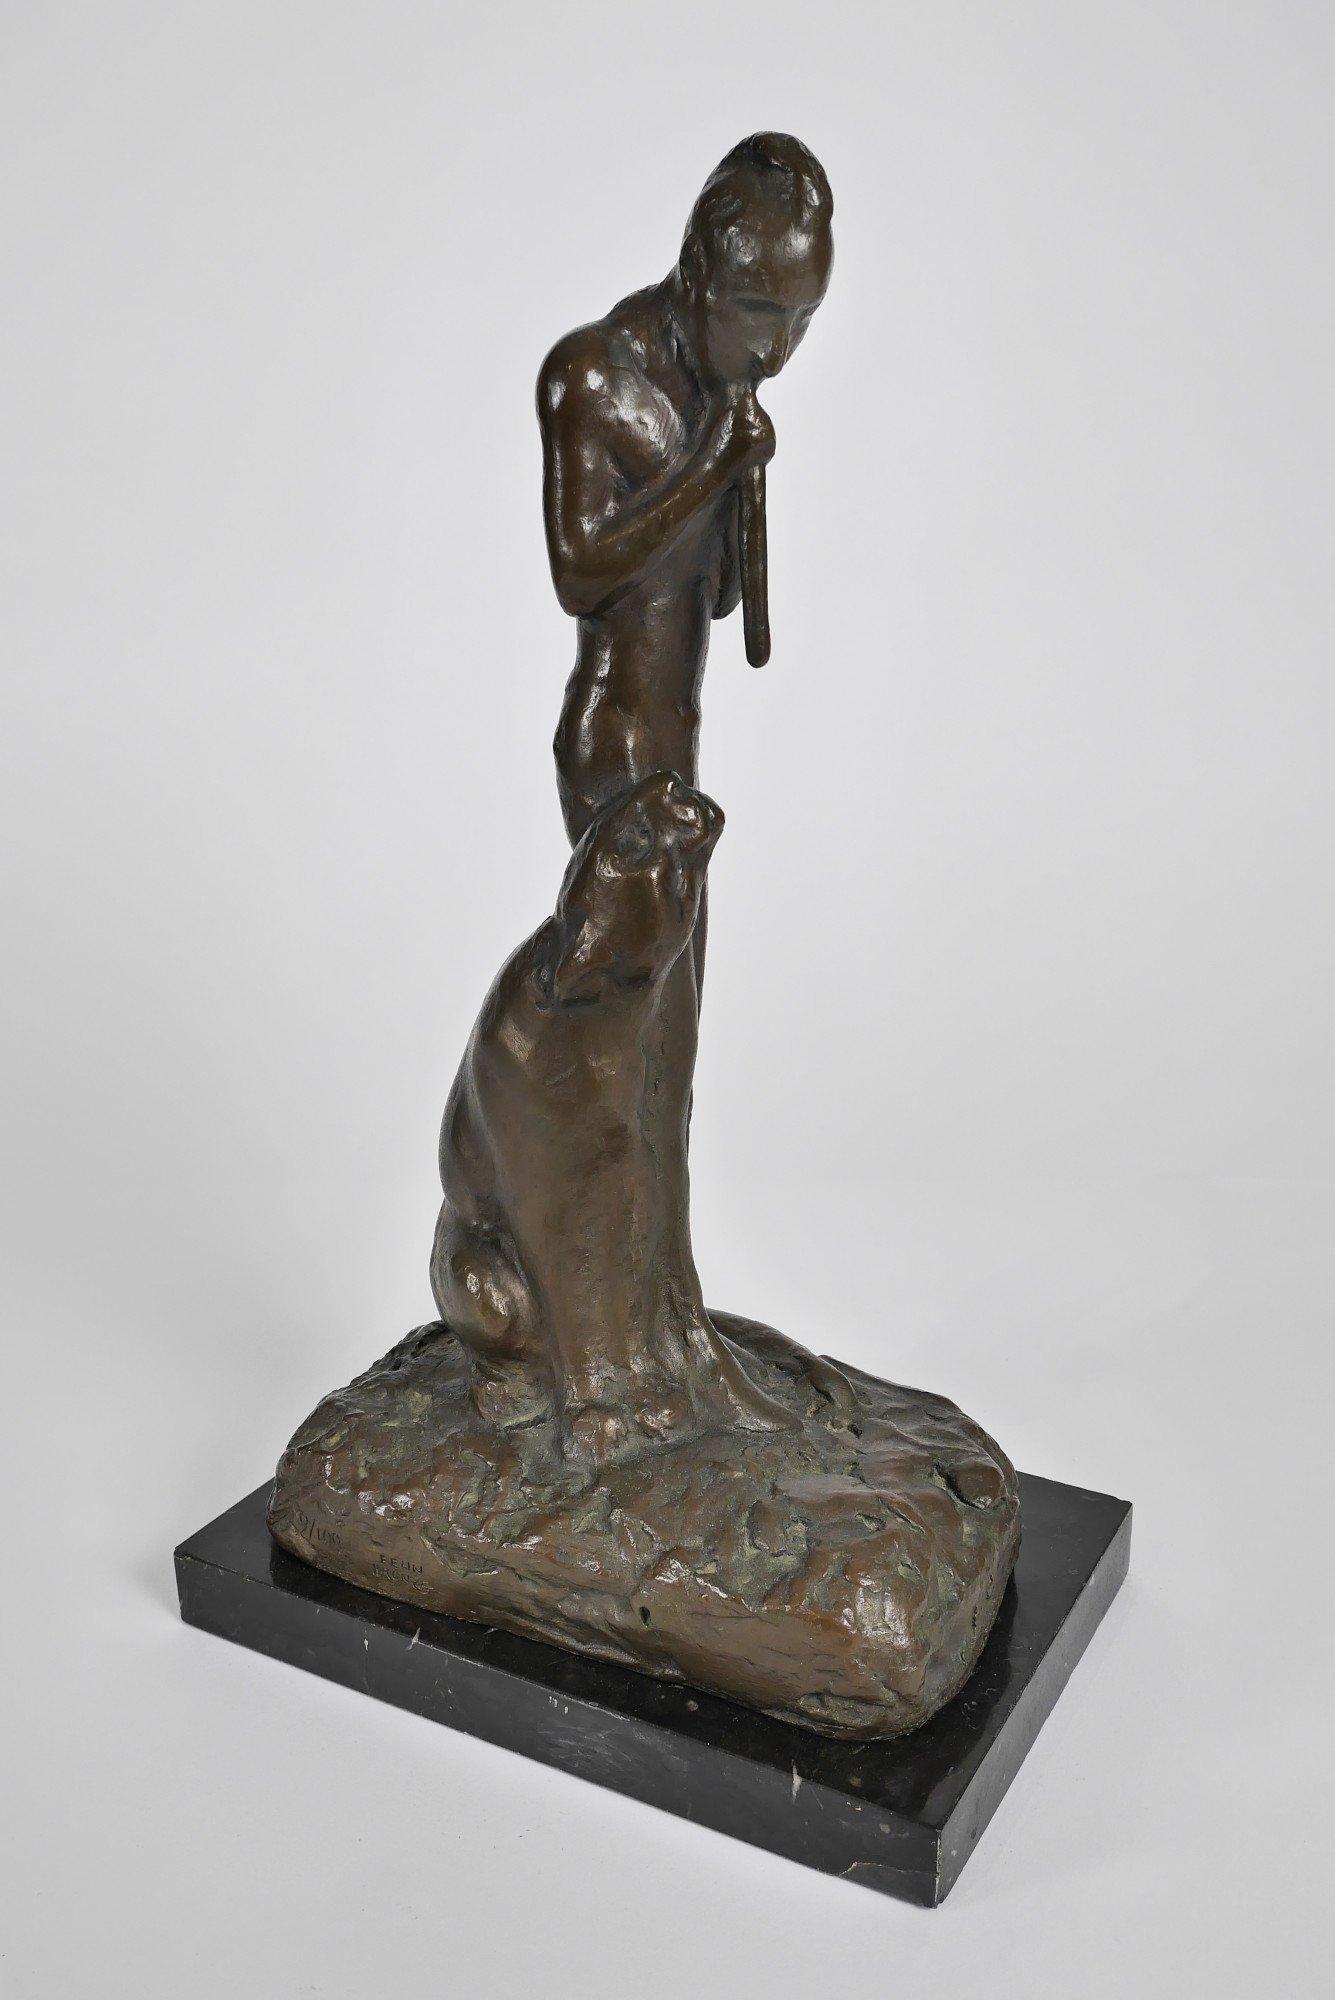 Edwin Willard Deming Figurative Sculpture - Man with Flute and Cougar, American 19th/20th century bronze w/ marble base